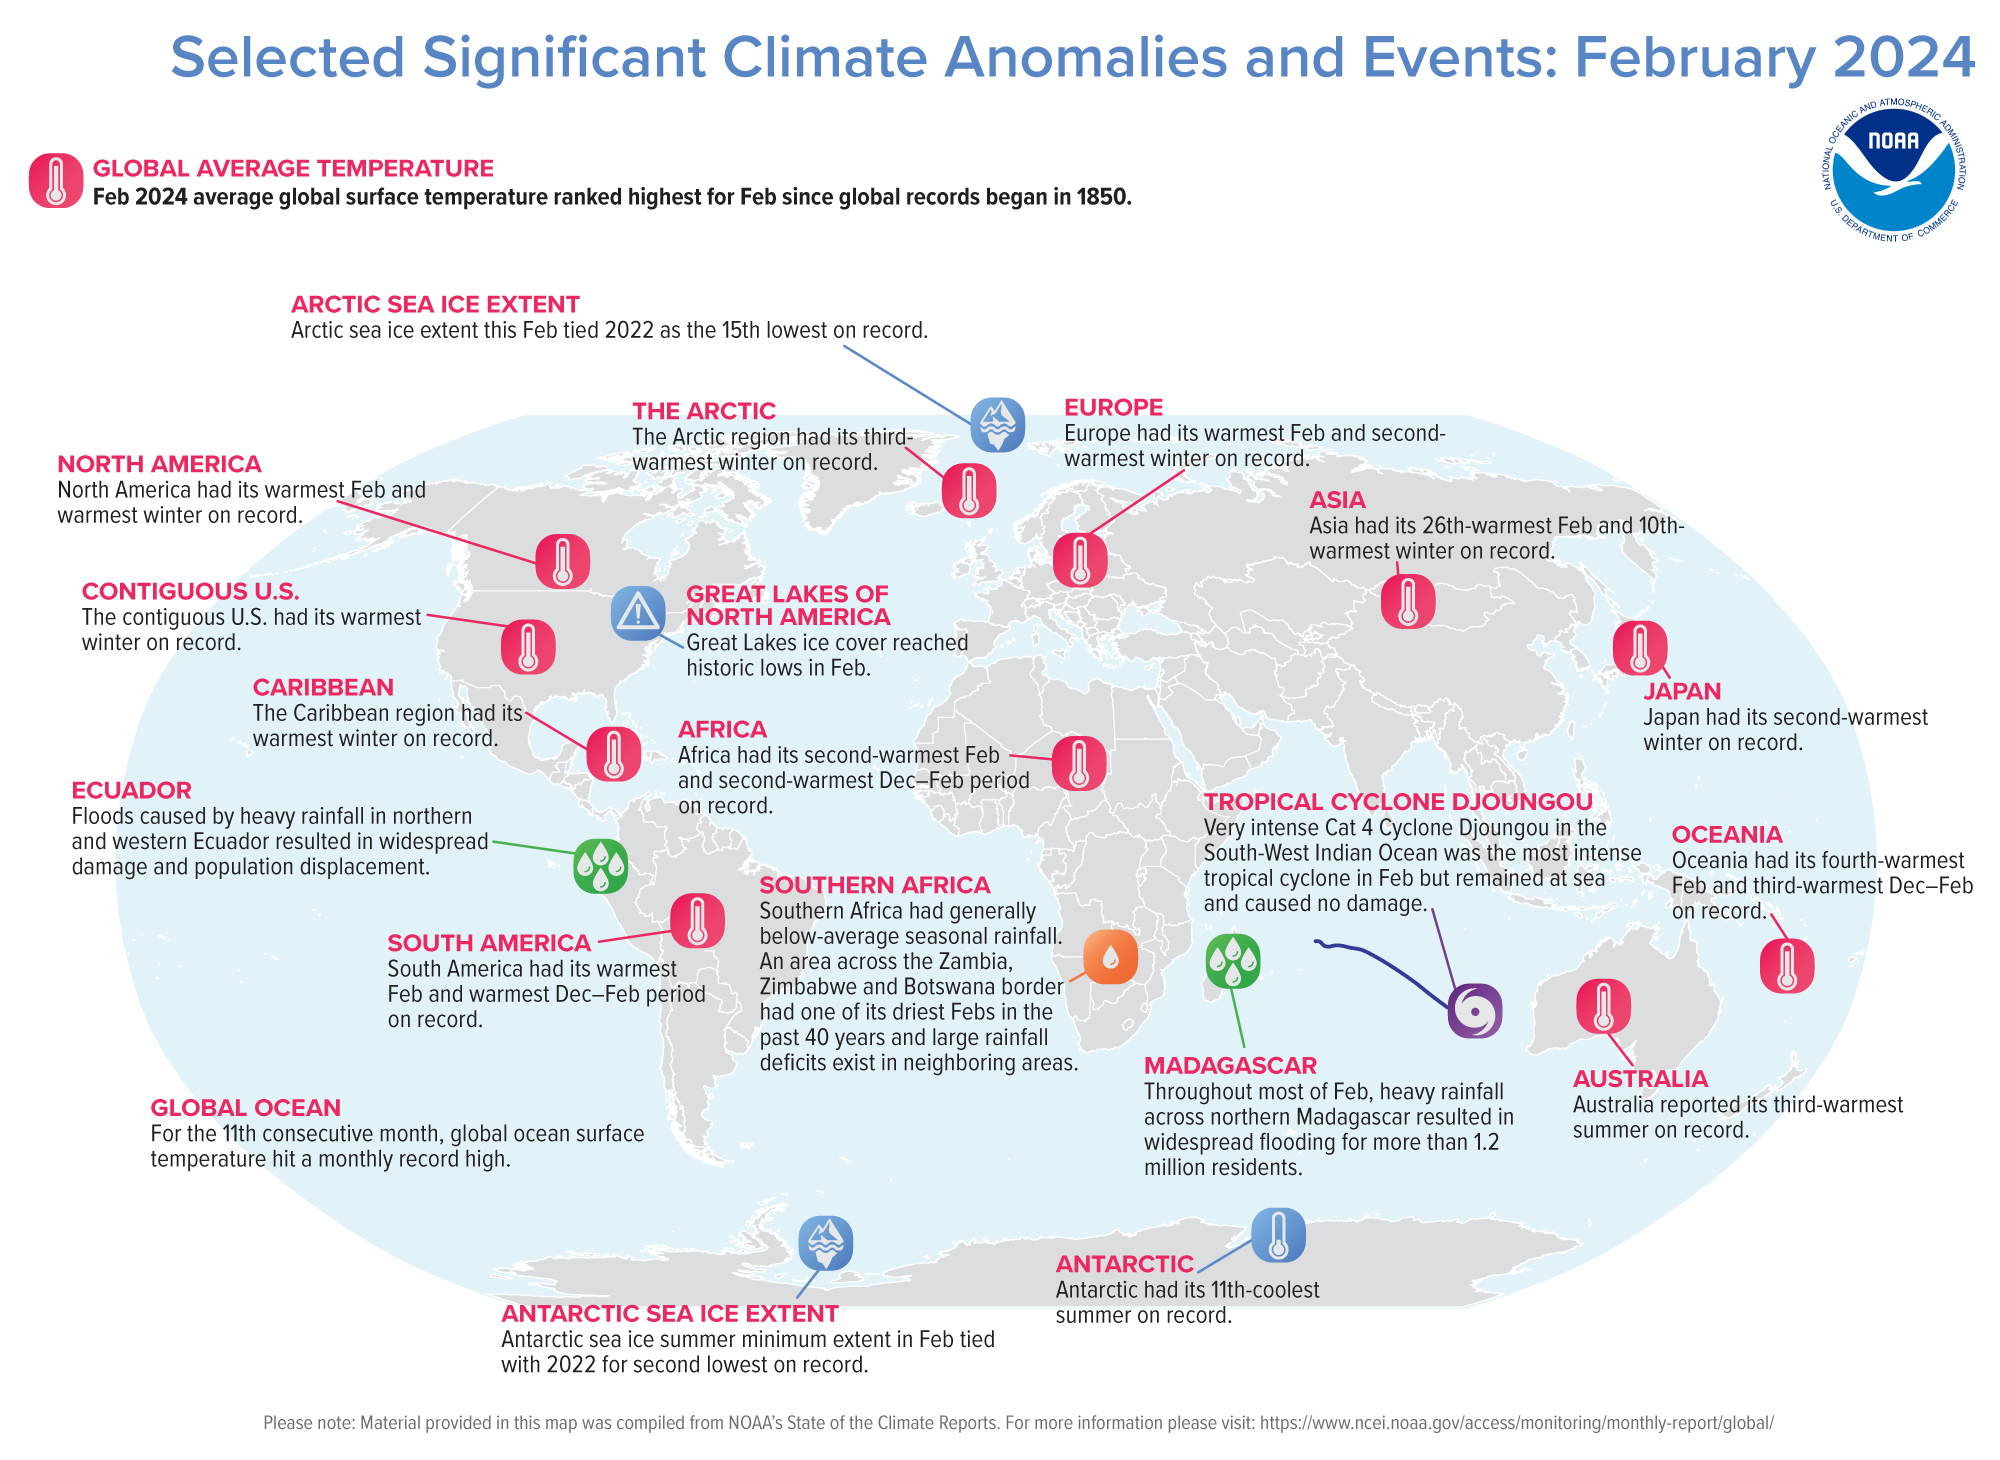 Map of world showing locations of significant climate anomalies and events in February 2024 with text describing each event and title at top stating “Selected Significant Climate Anomalies and Events: February 2024”. 